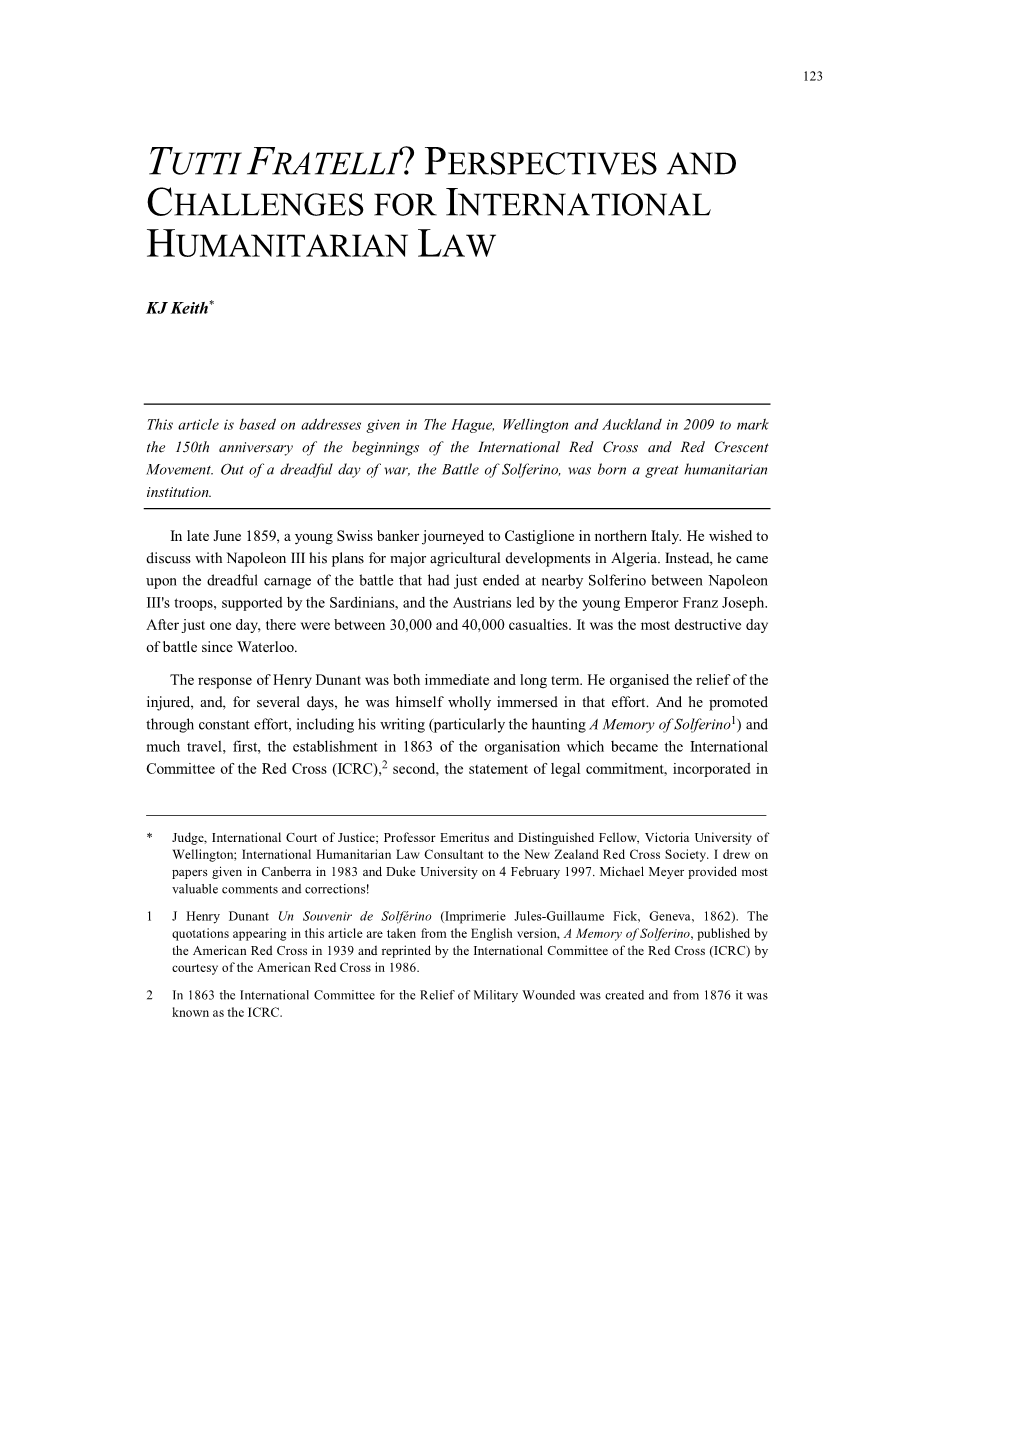 Tutti Fratelli? Perspectives and Challenges for International Humanitarian Law